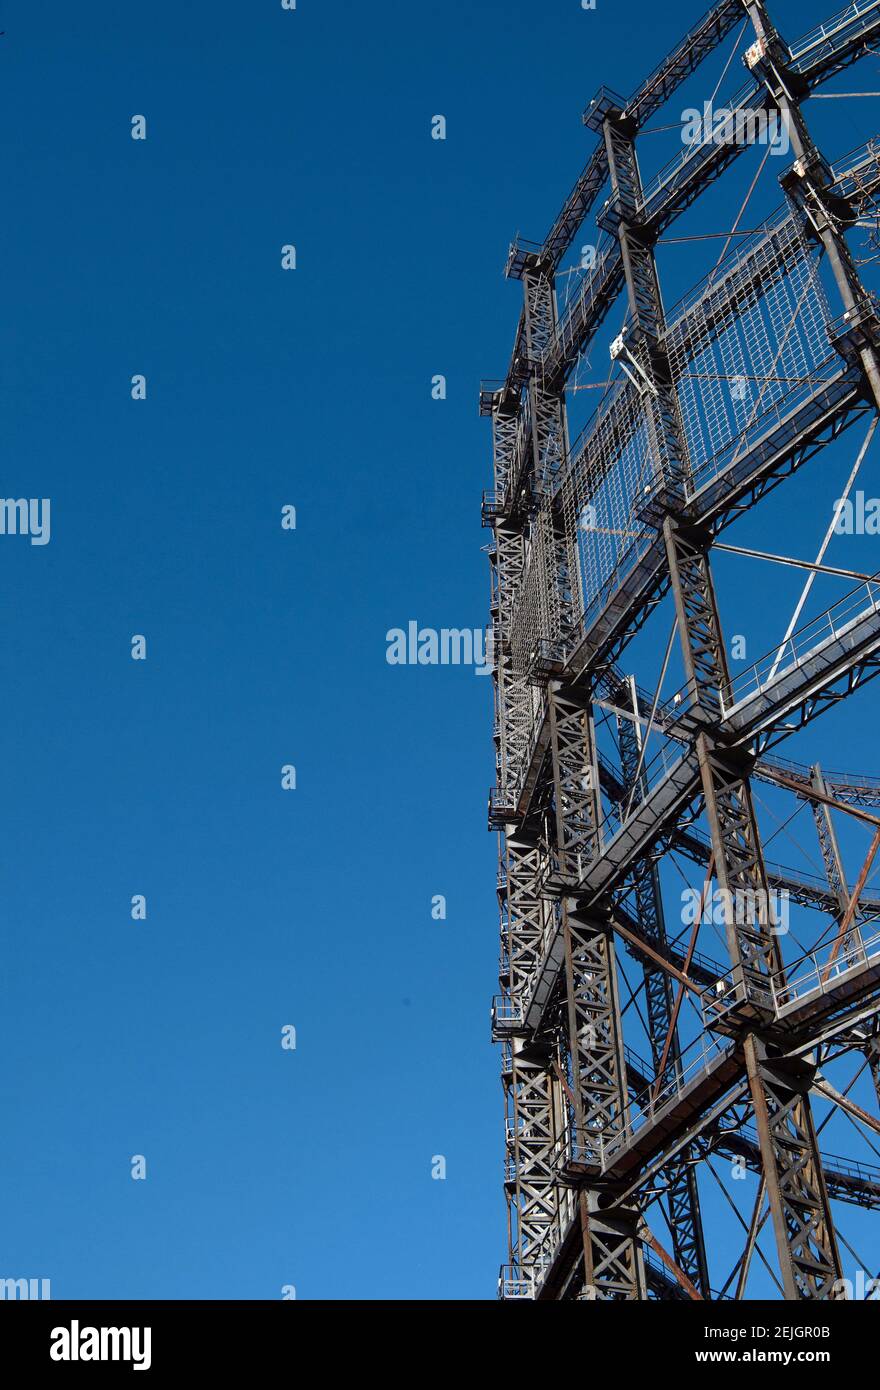 Berlin, Germany. 22nd Feb, 2021. Struts of the gasometer stand in front of a blue sky. The participation procedure for the conversion of the listed Gasometer ends on 24 February. If the owner has his way, the over 100-year-old steel construction is to be given a new lease of life as the shell of an office building. However, a citizens' initiative wants to prevent this and is calling for signatures on a petition. Credit: Paul Zinken/dpa-Zentralbild/ZB/dpa/Alamy Live News Stock Photo